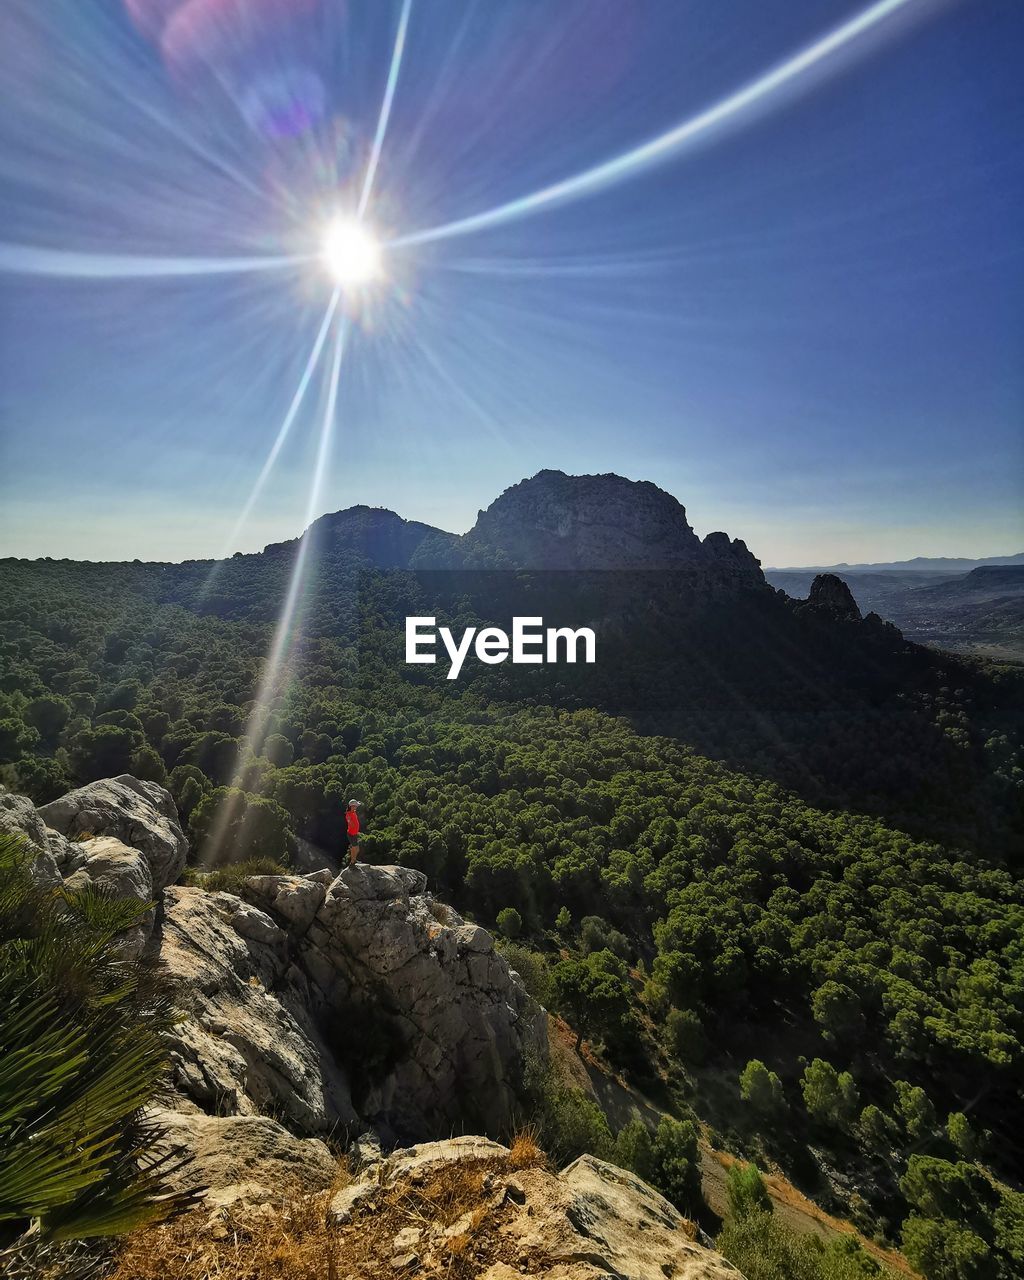 SCENIC VIEW OF MOUNTAIN AGAINST BRIGHT SUN